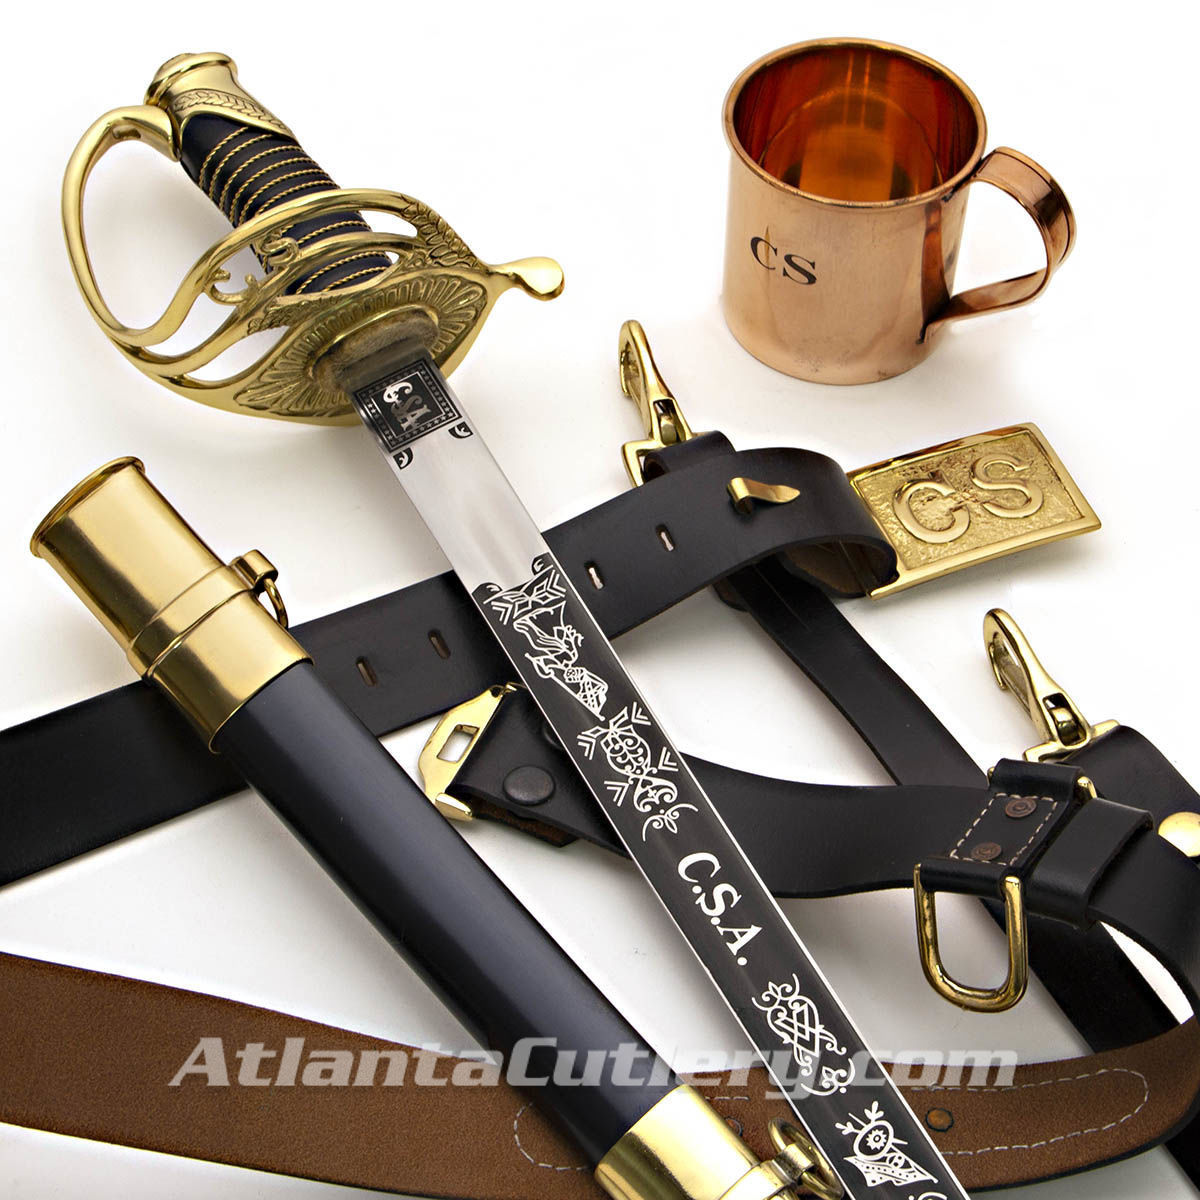 The Confederate Kit with Confederate Cavalry Officer's Saber , Leather Belt with Brass Confederate Buckle and engraved Copper Mug